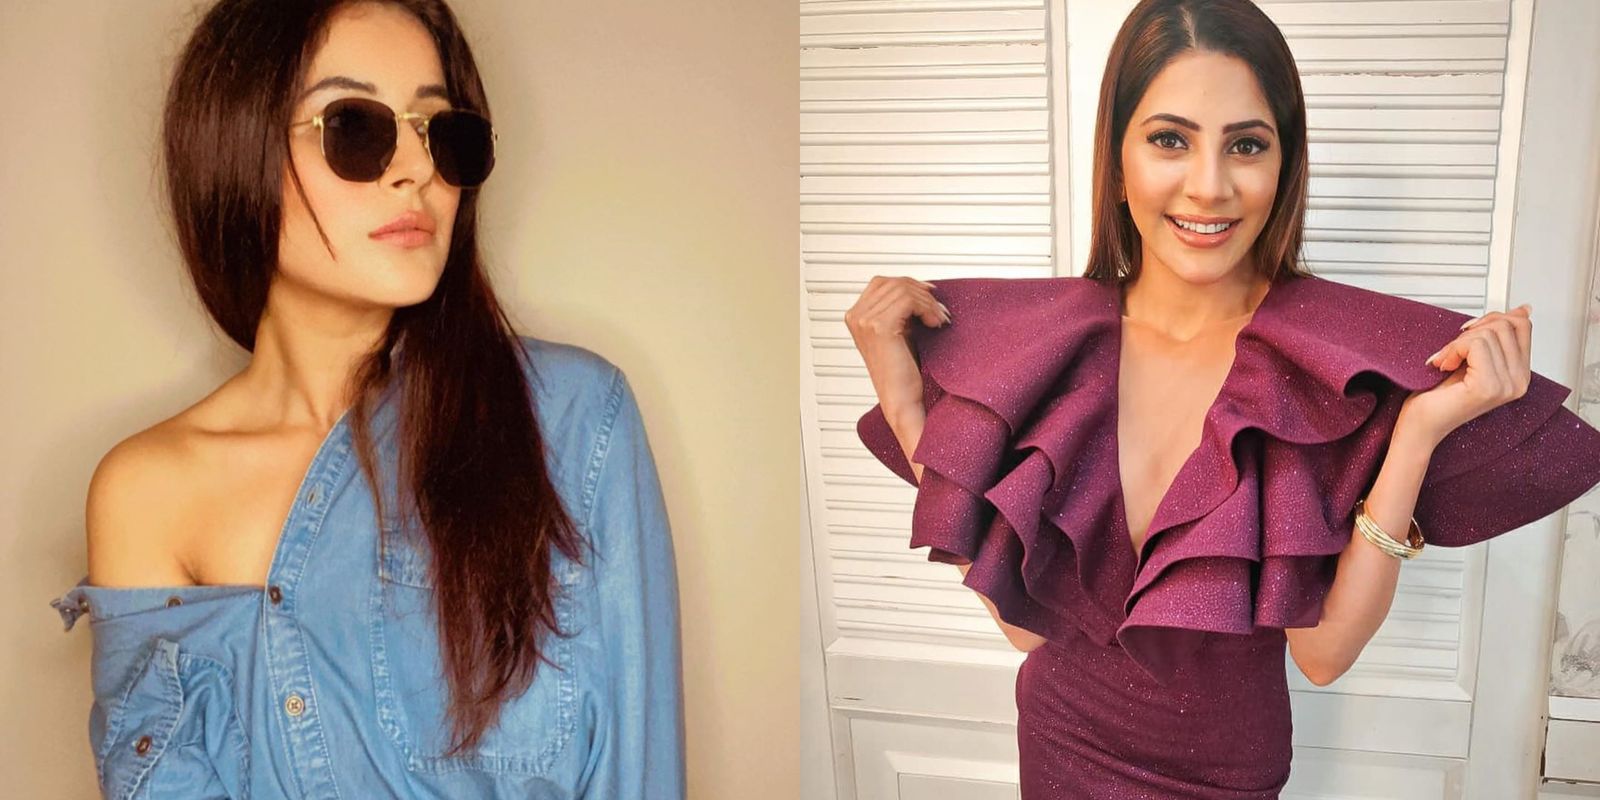 Bigg Boss 14: Shehnaaz Gill Fans Cringe As Nikki Tamboli Get Compared To Her, Call Her A 'Fake Duplicate'